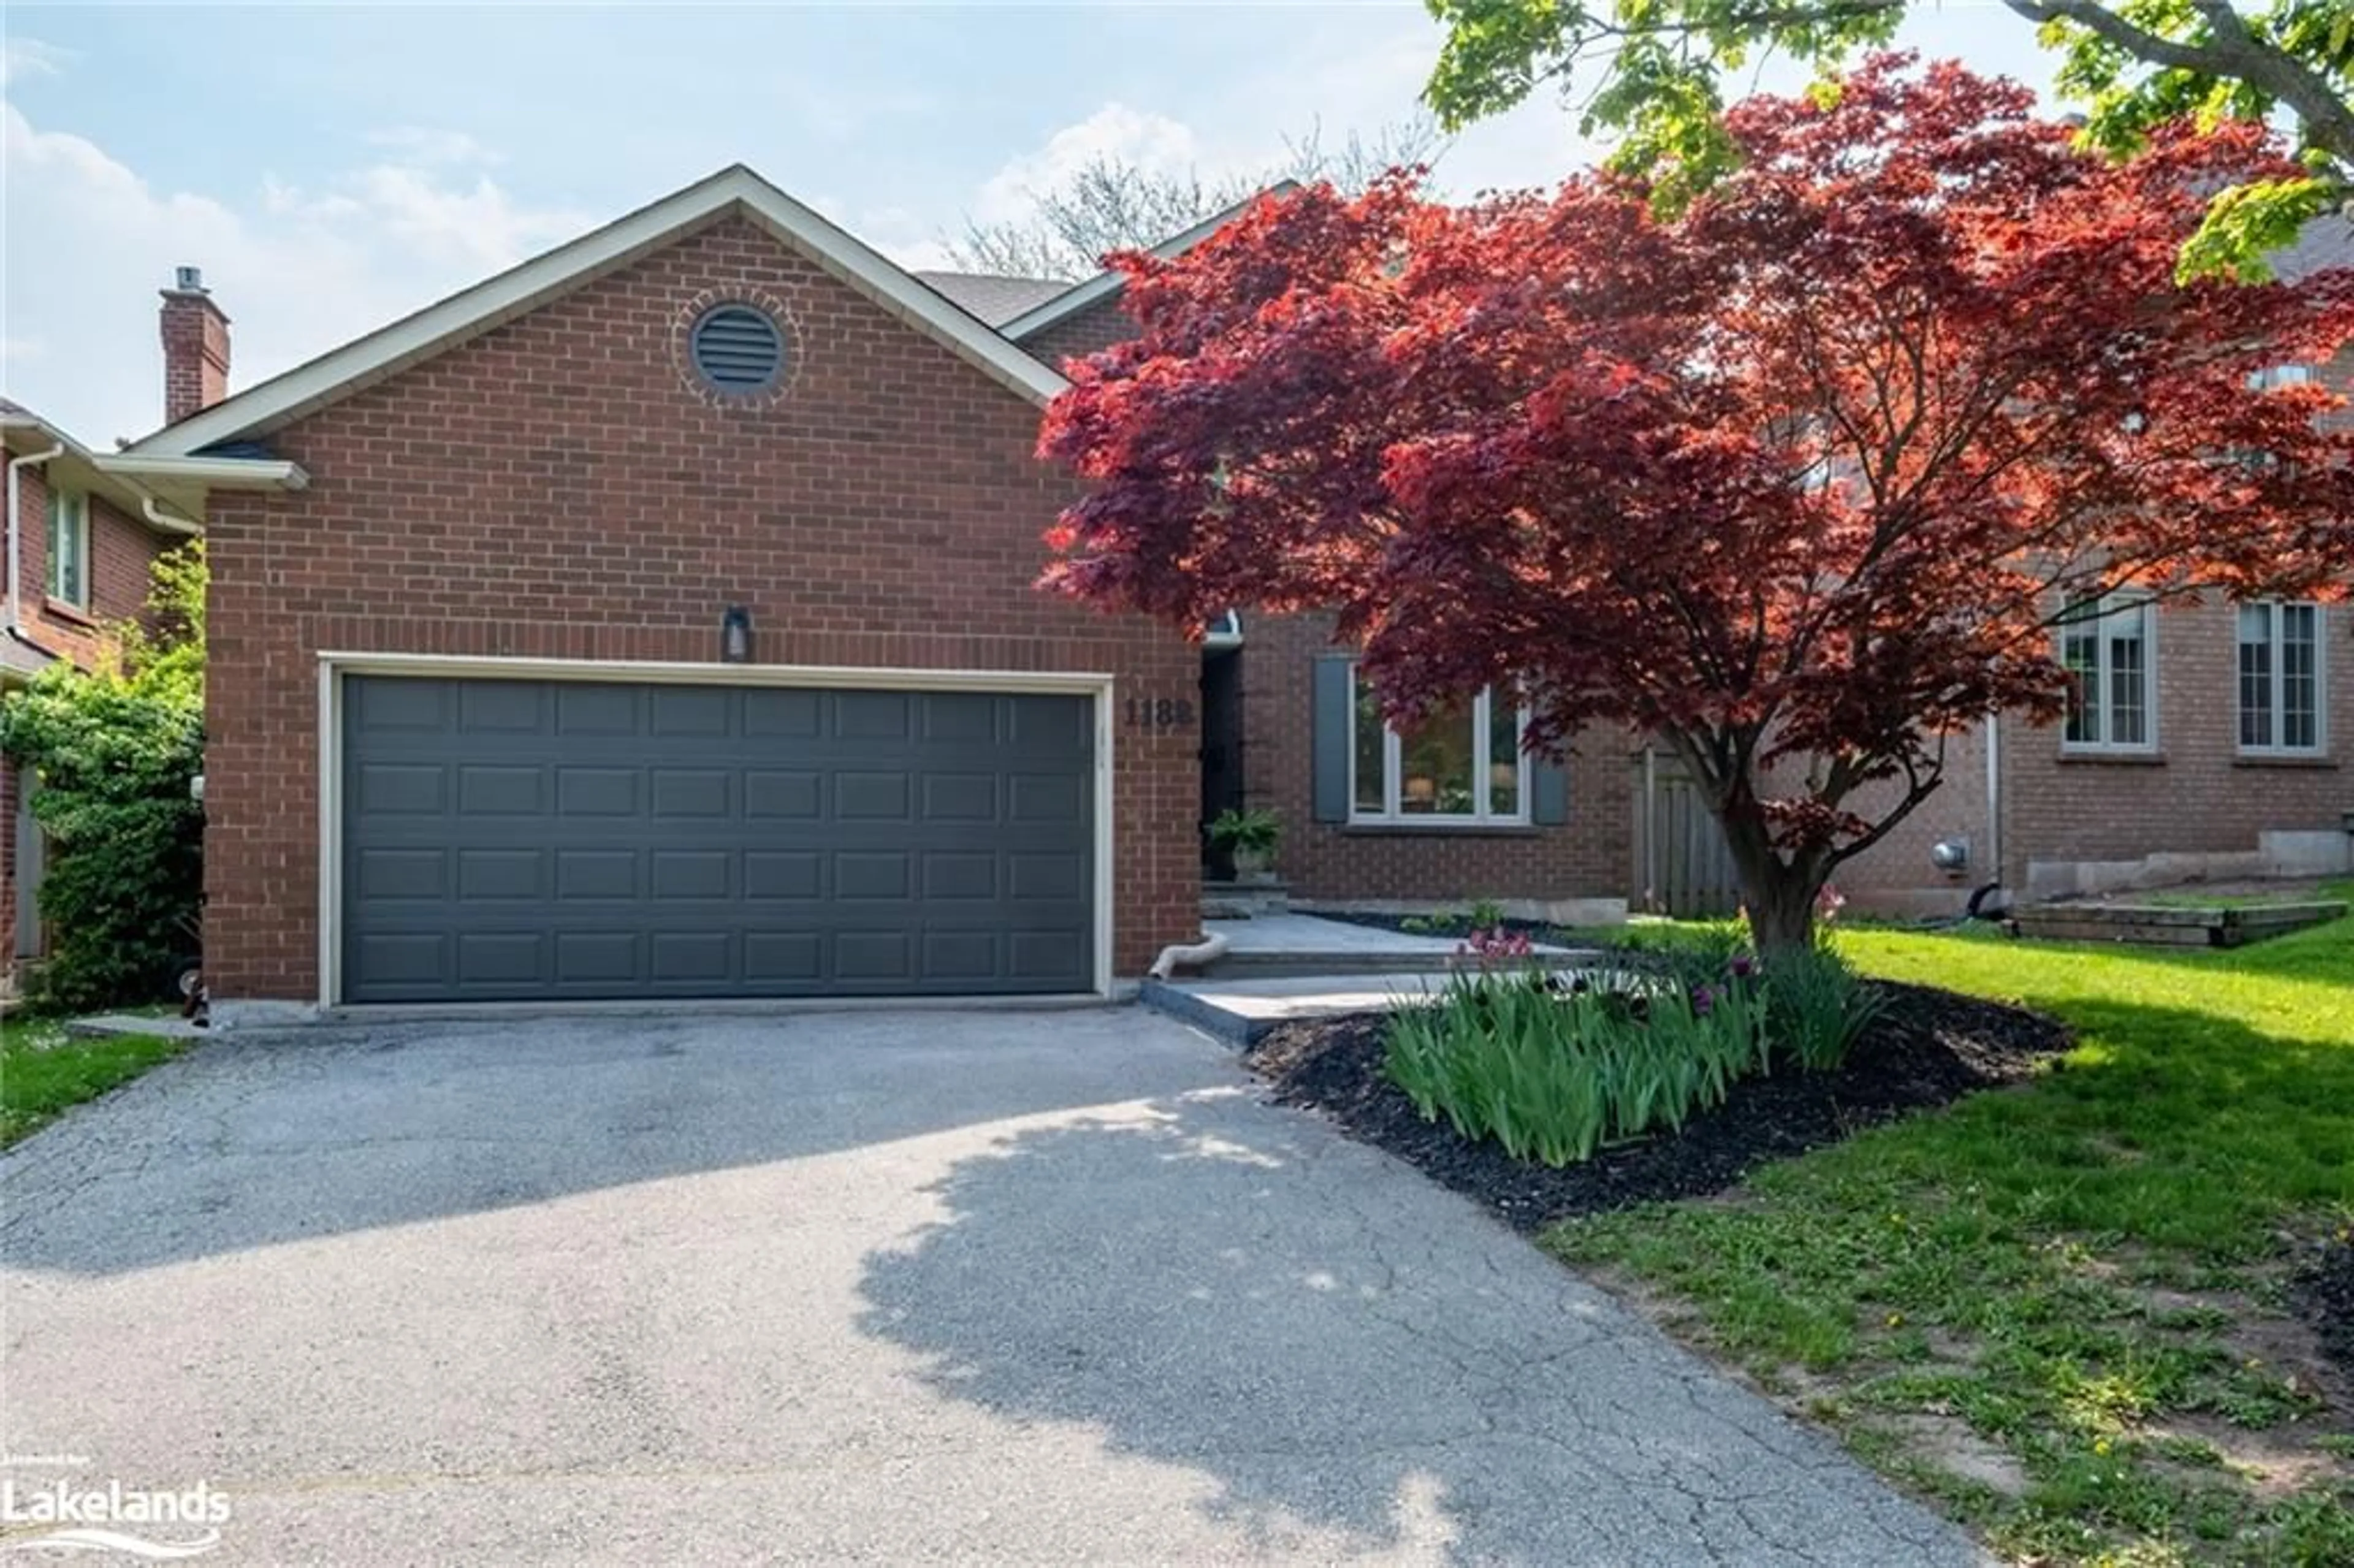 Home with brick exterior material for 1188 Woodview Dr, Oakville Ontario L6M 2M4